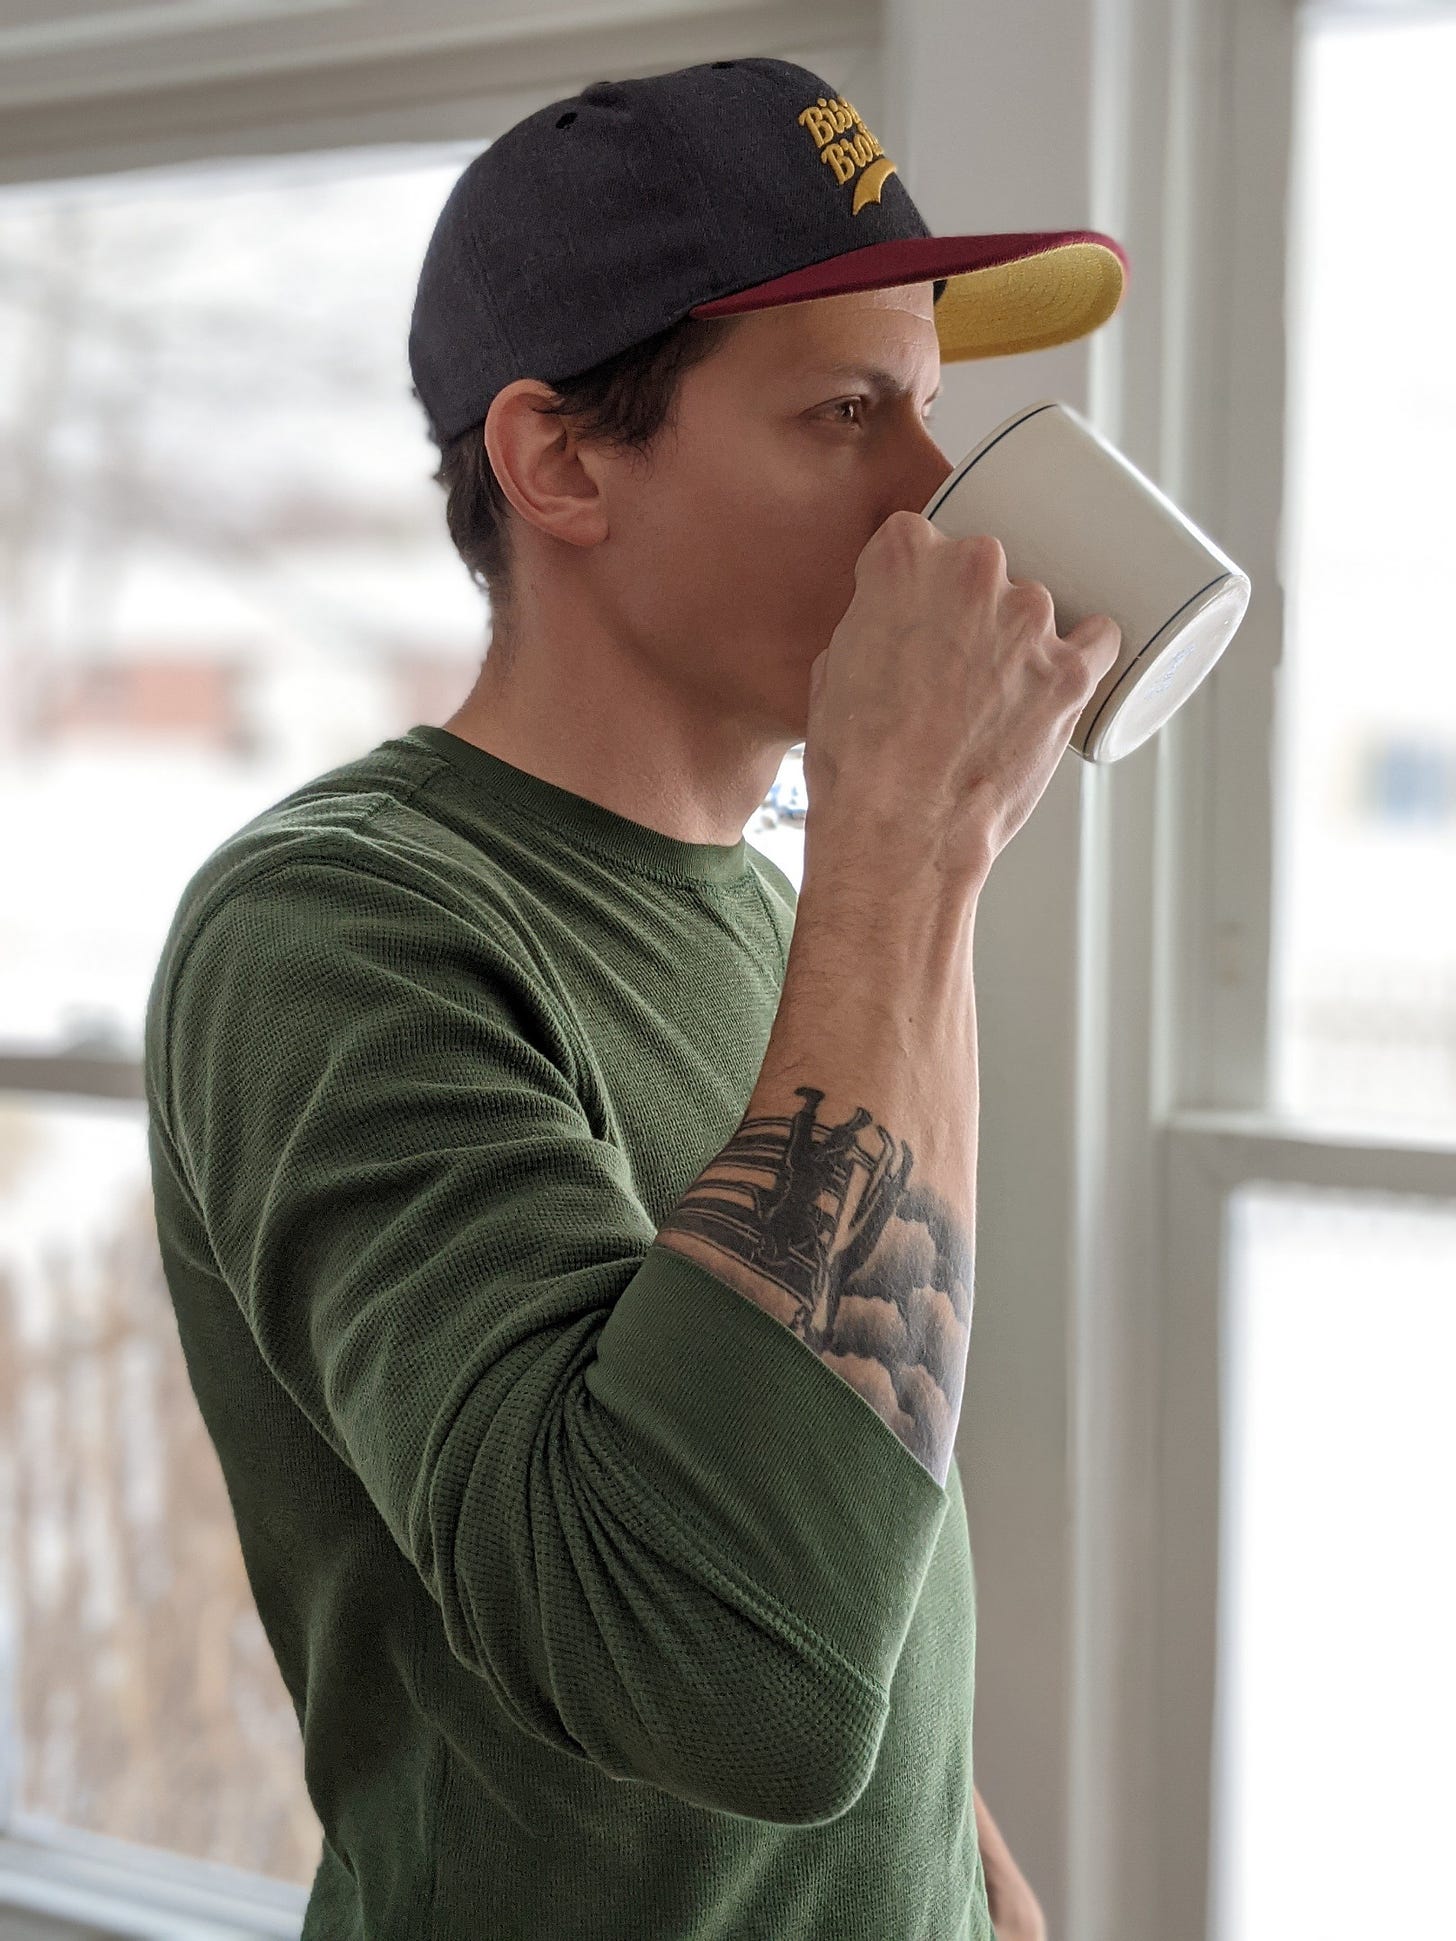 newsletter author drinking coffee, looking out window